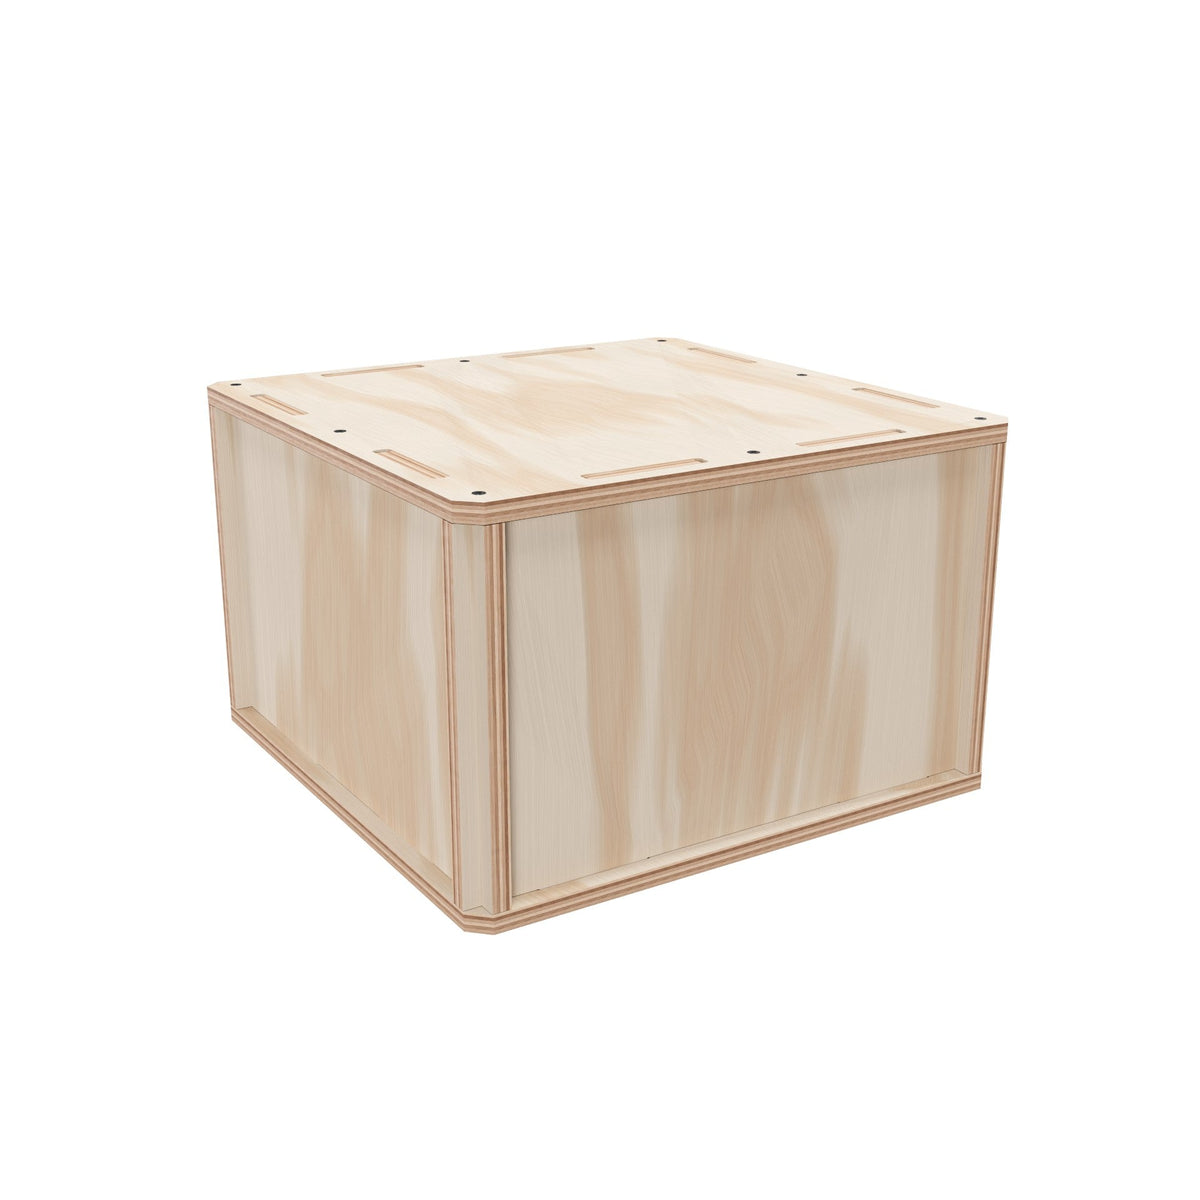 Plywood Shipping Crate 16x16x10